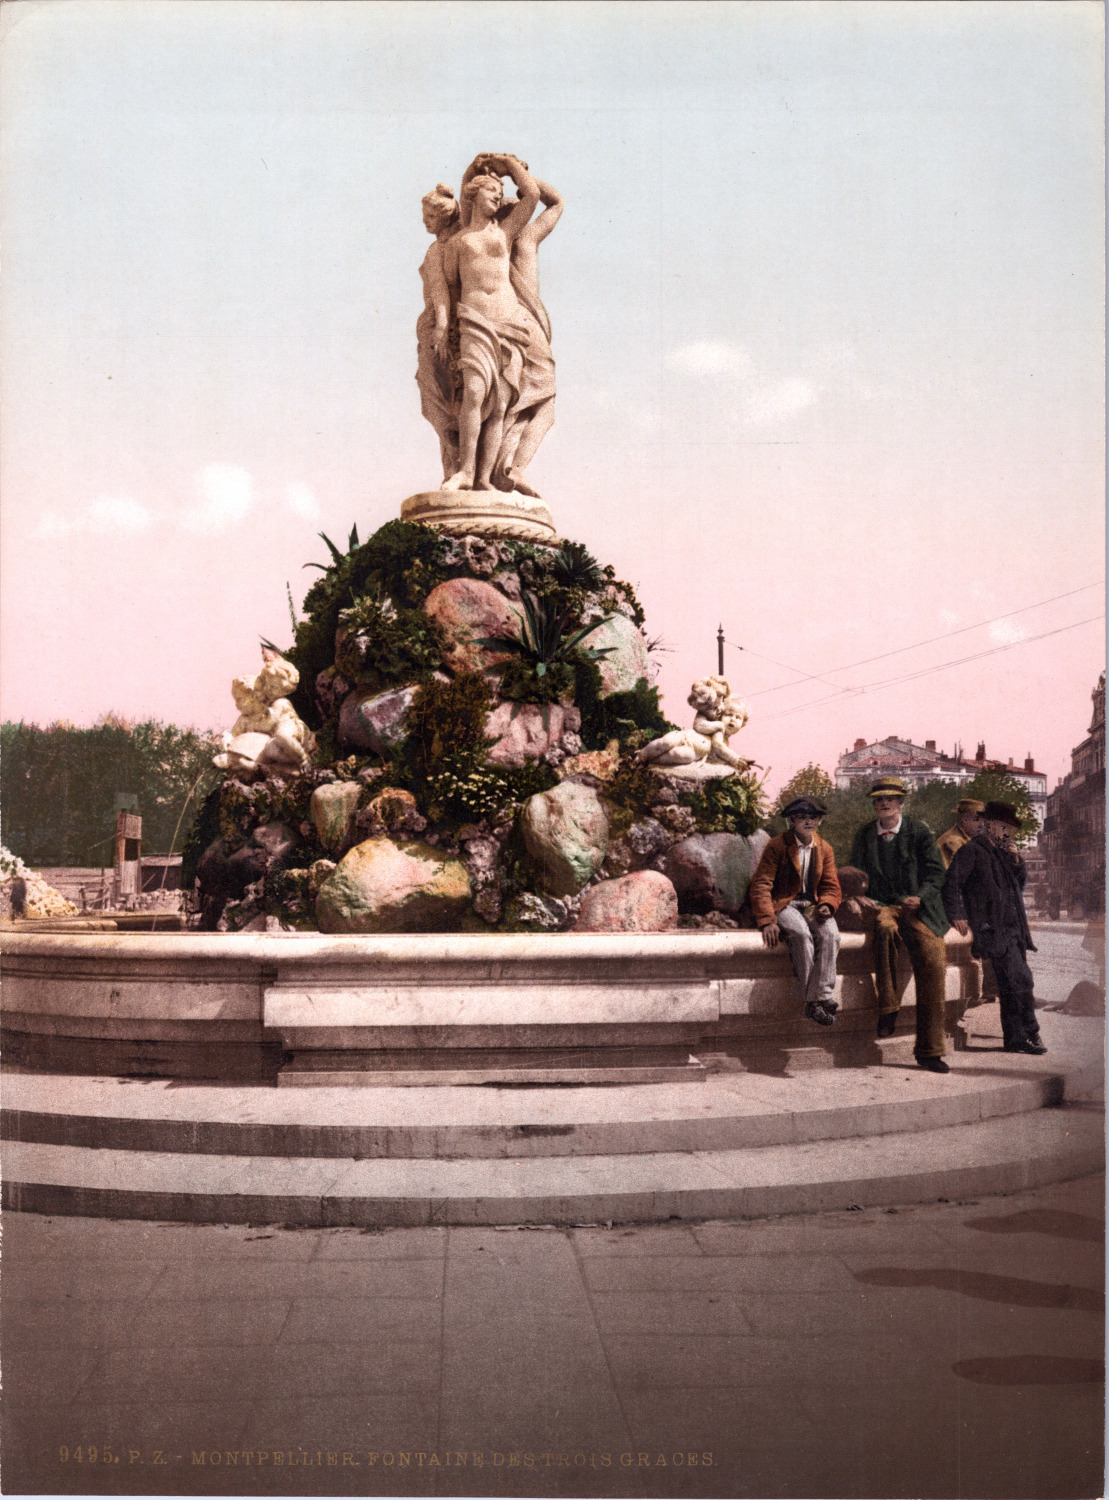 France, Montpellier. The Fountain of Three Graces.  vintage print photochrome